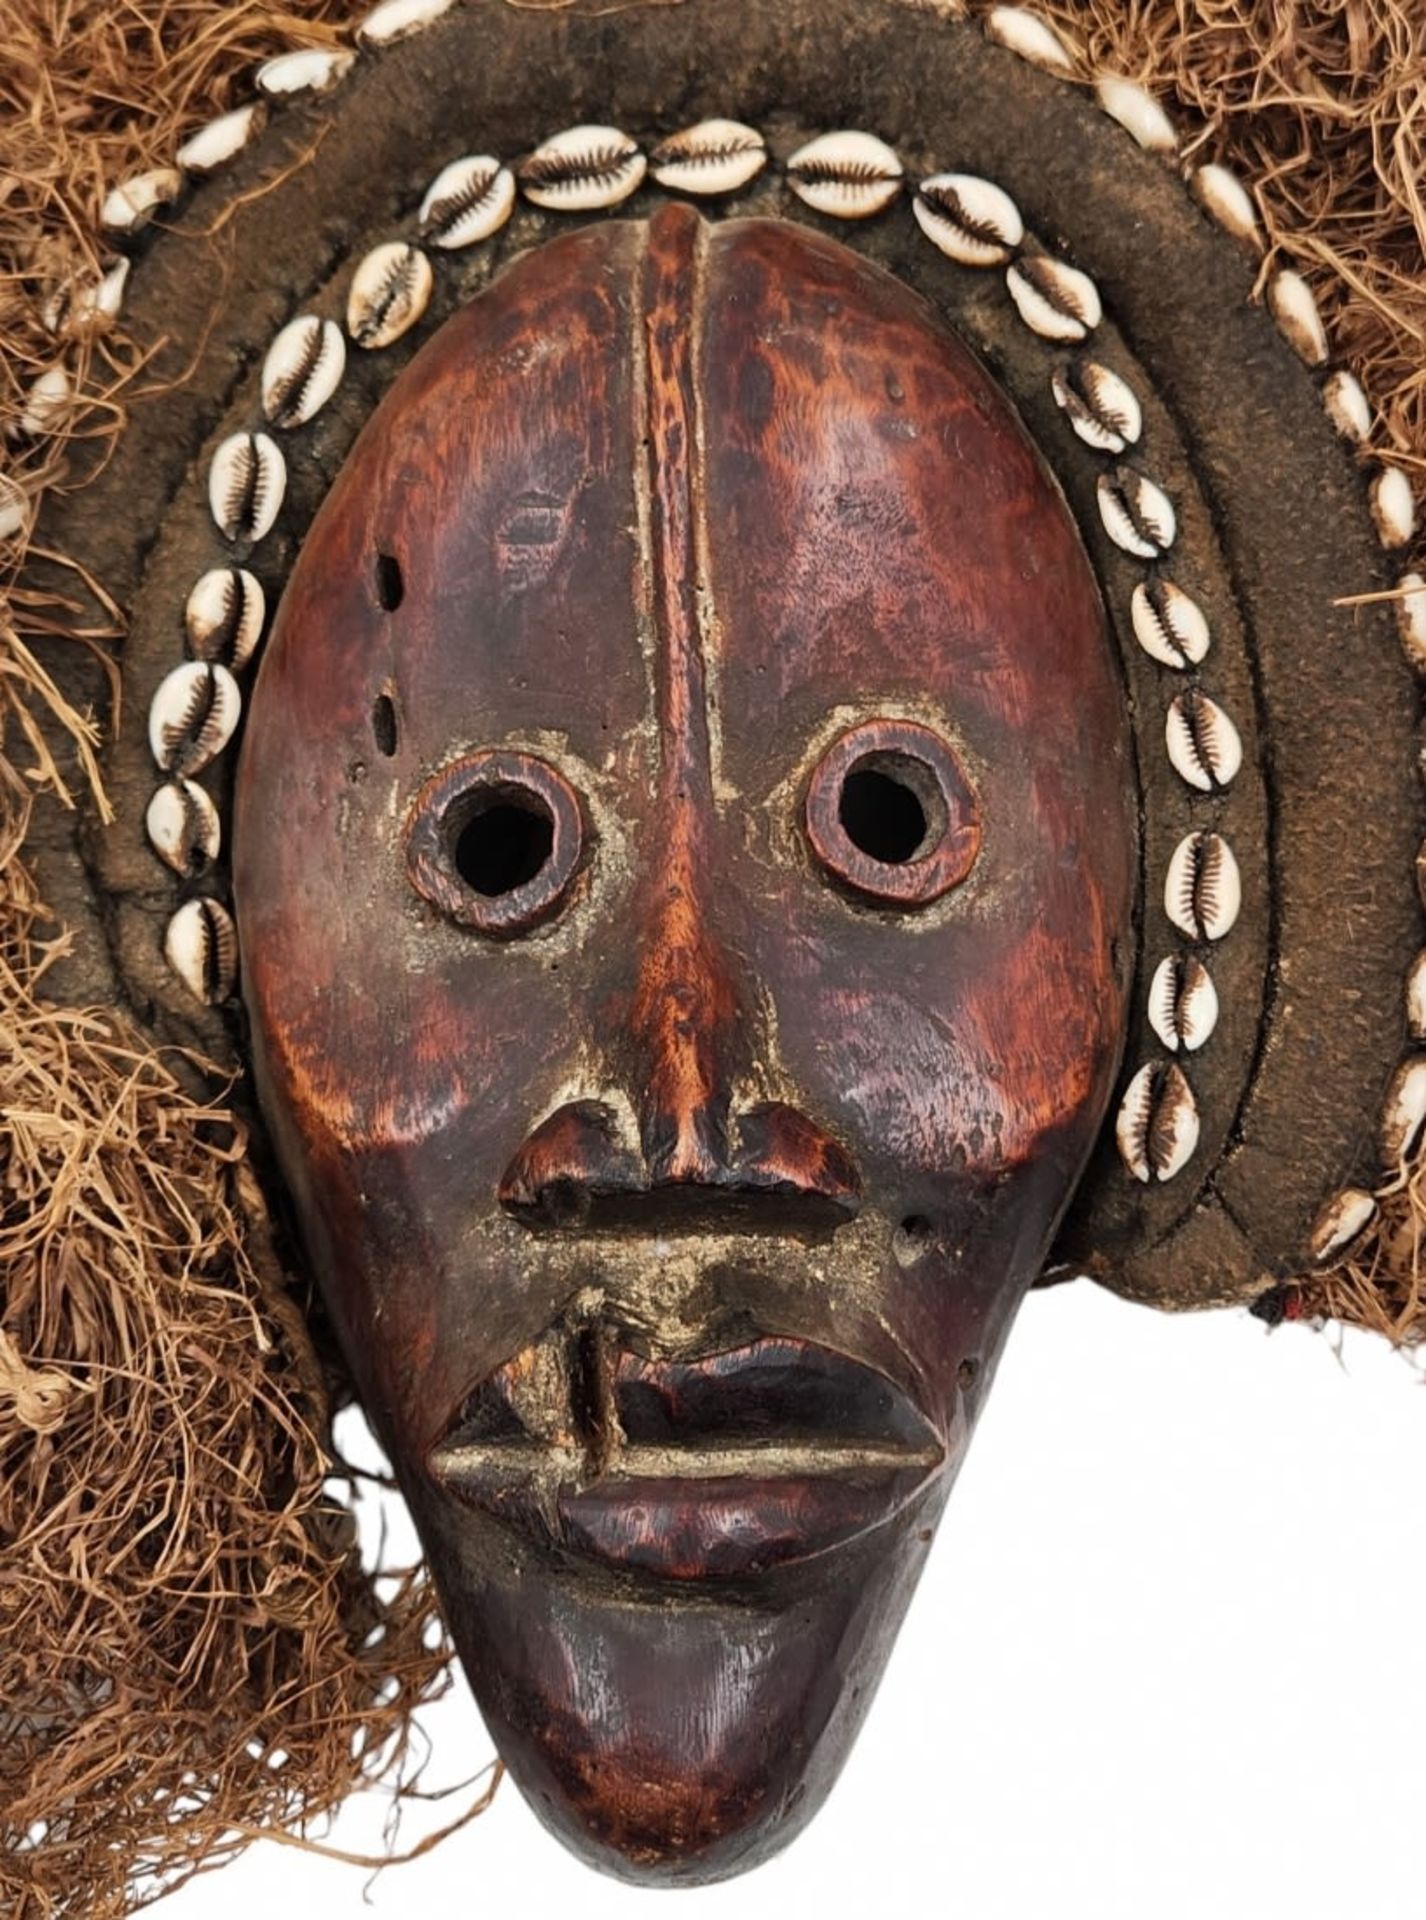 Antique African mask - Dan People, made of carved wood and plant fibers, decorated with shells - Image 2 of 3